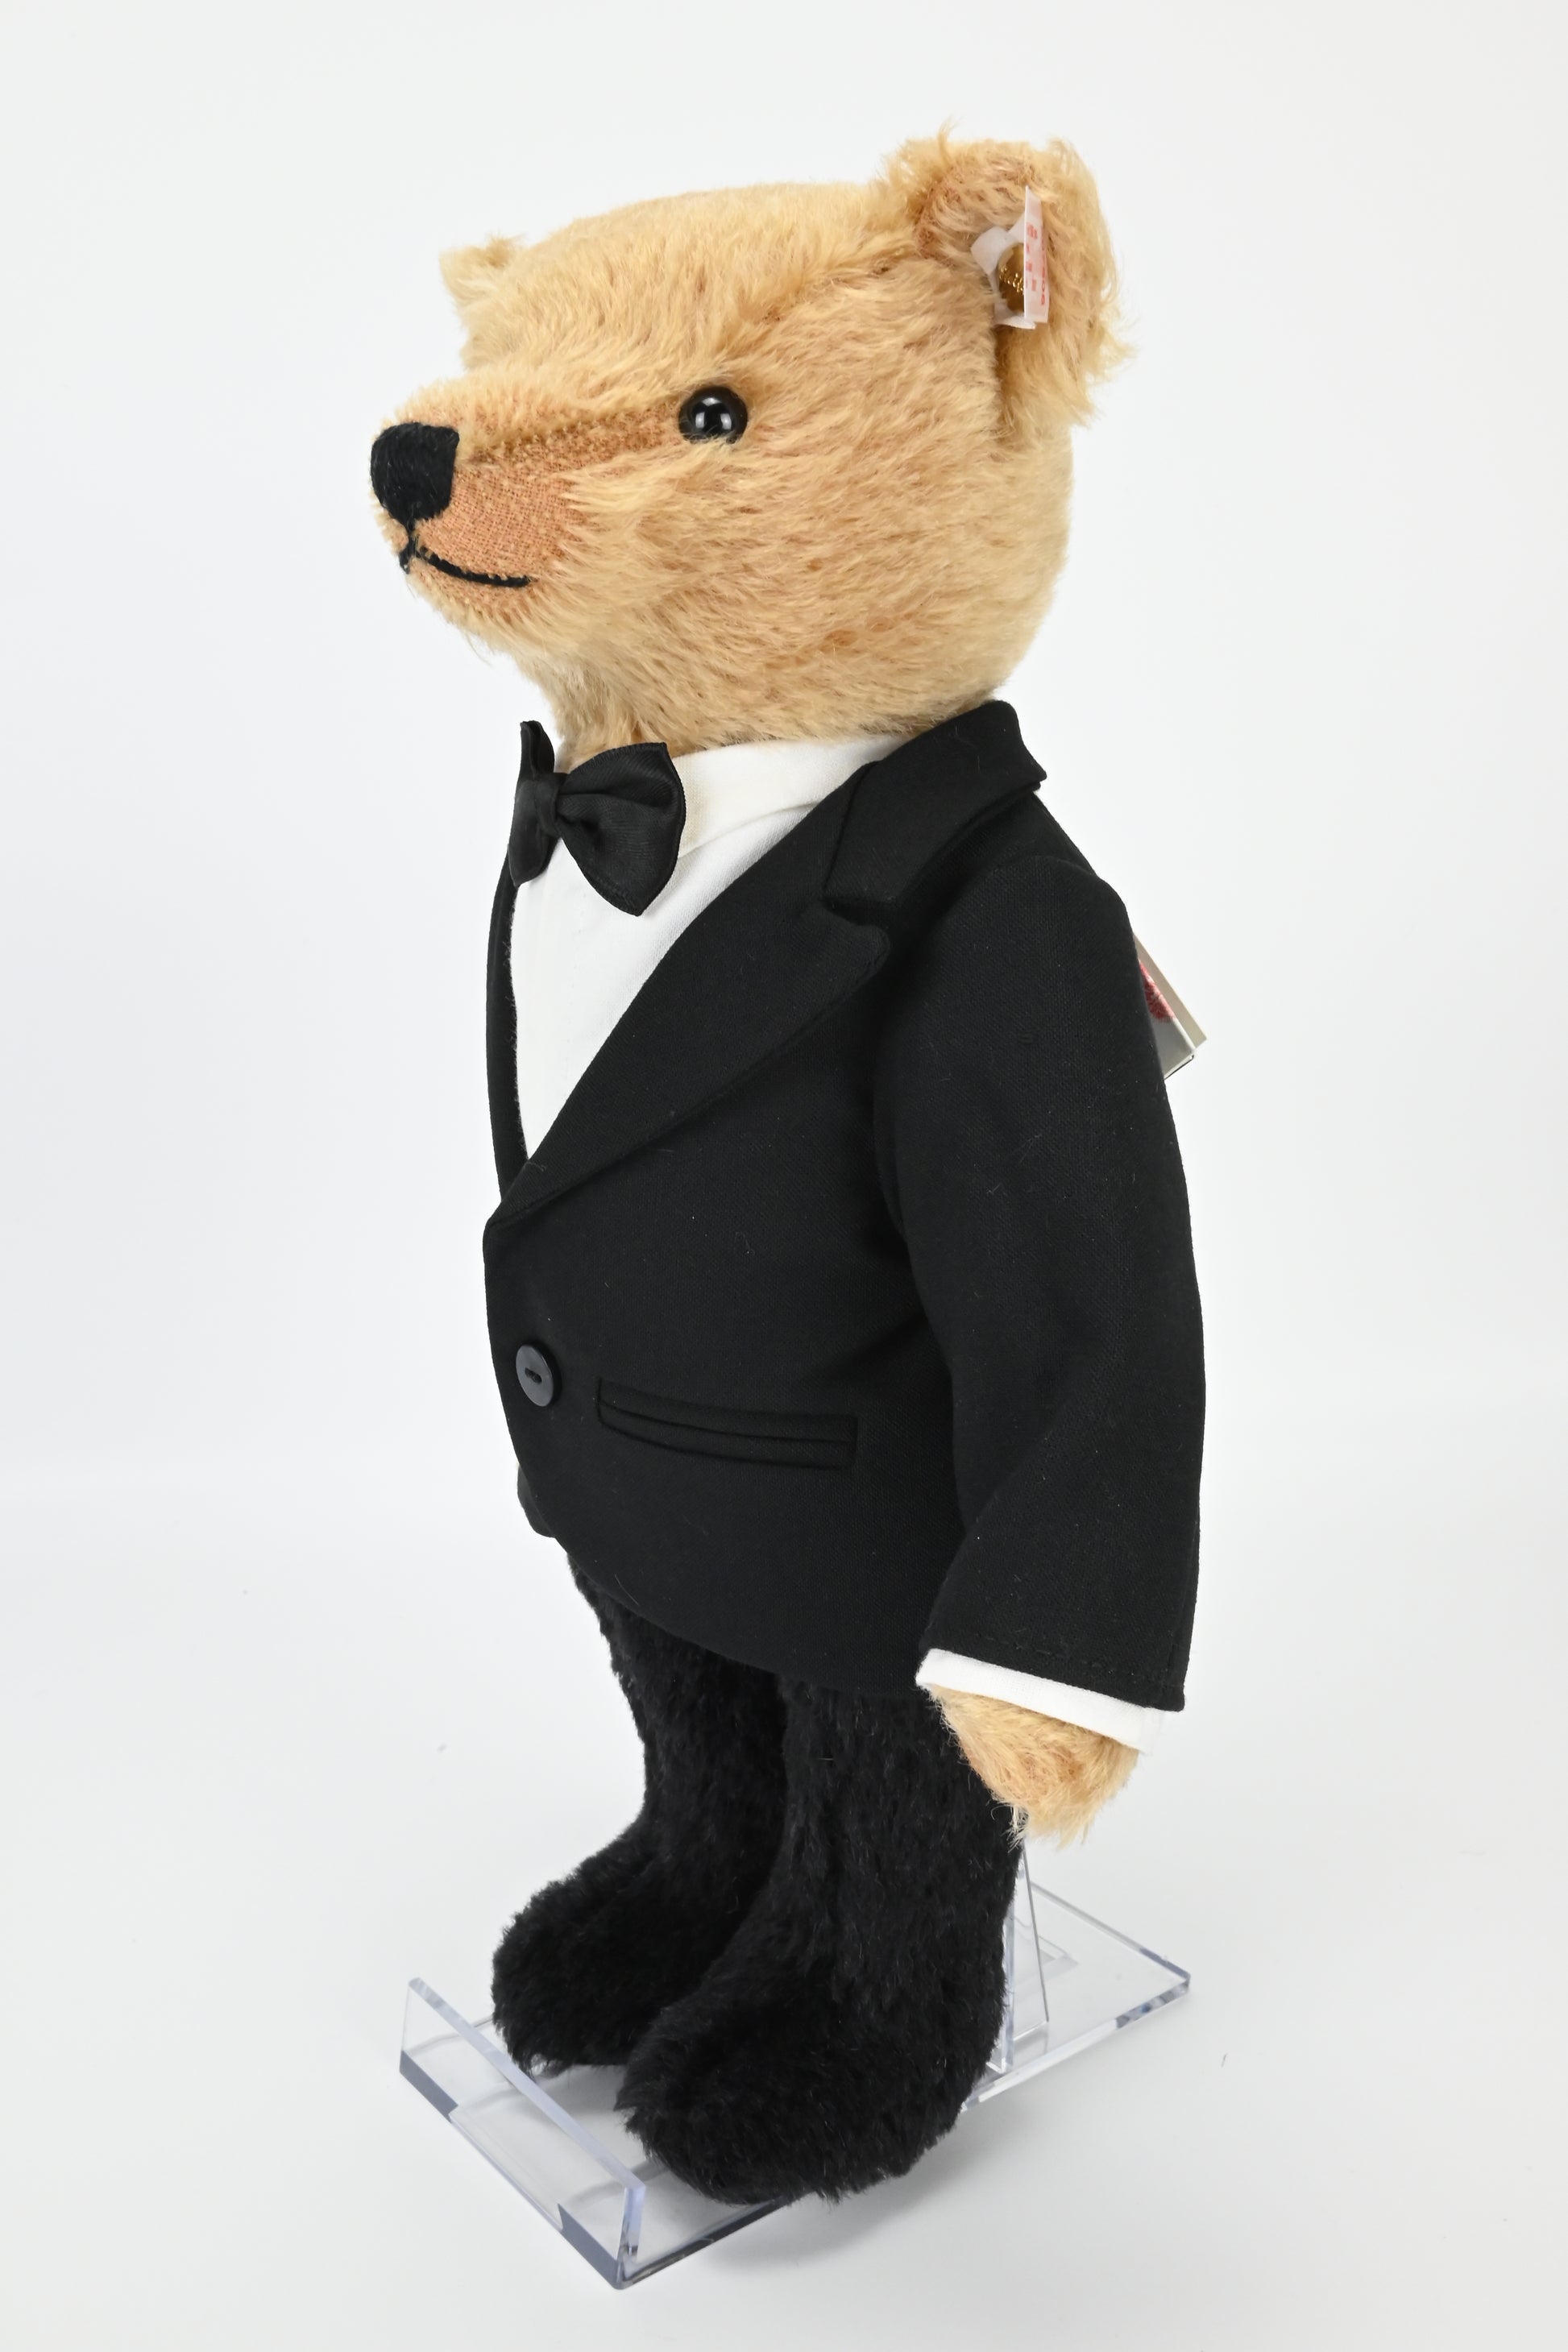 James Bond 60th Anniversary Bear Numbered Edition By Steiff